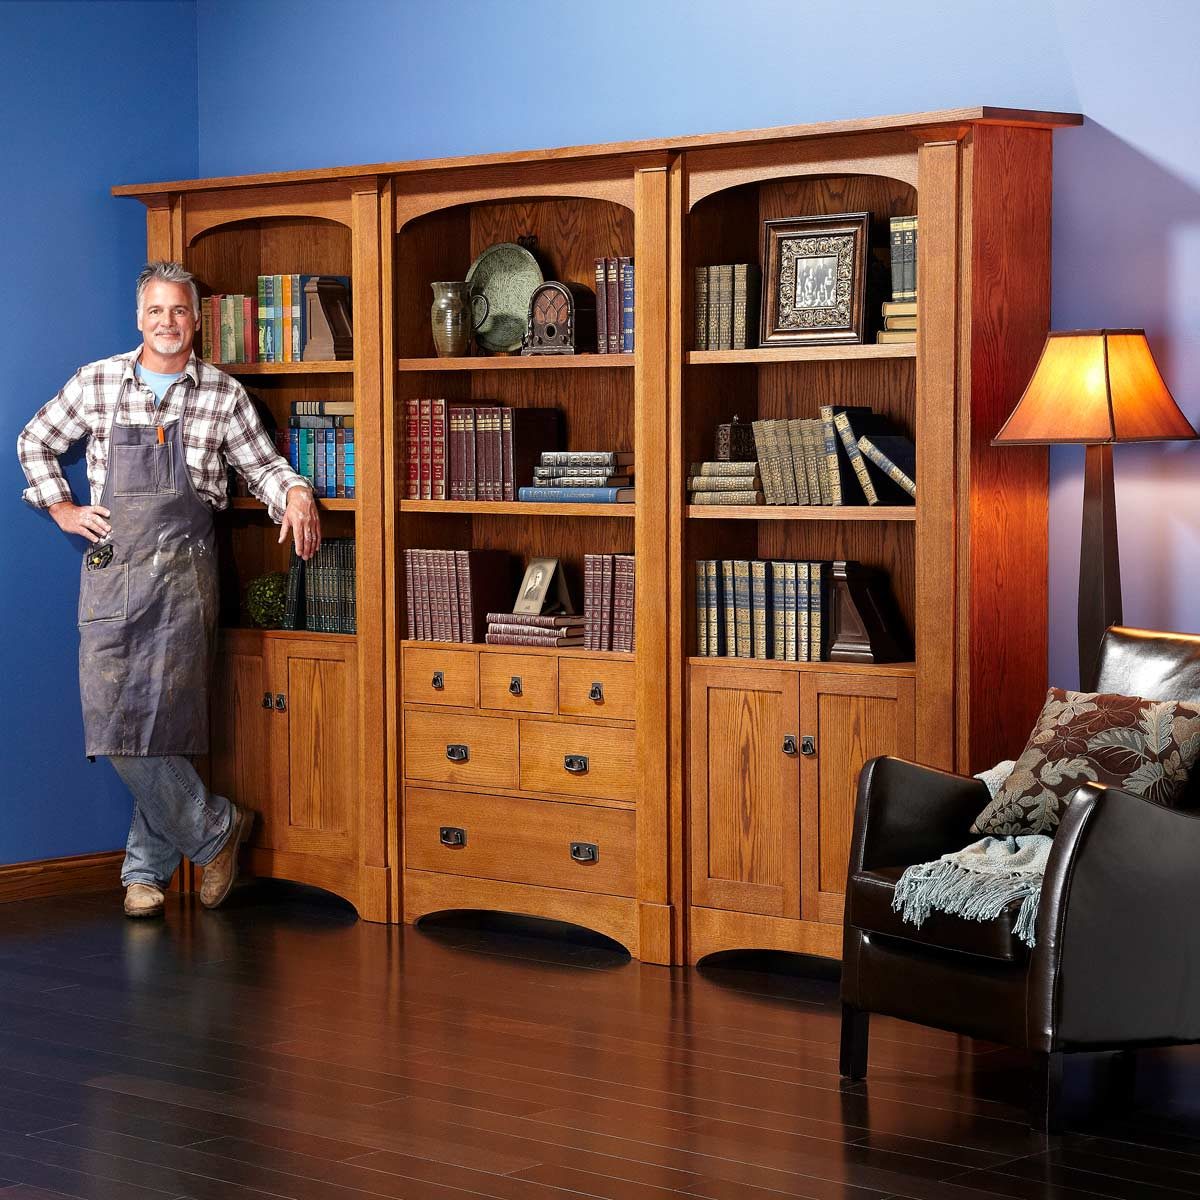 How to Build a Bookcase with Hidden Compartments